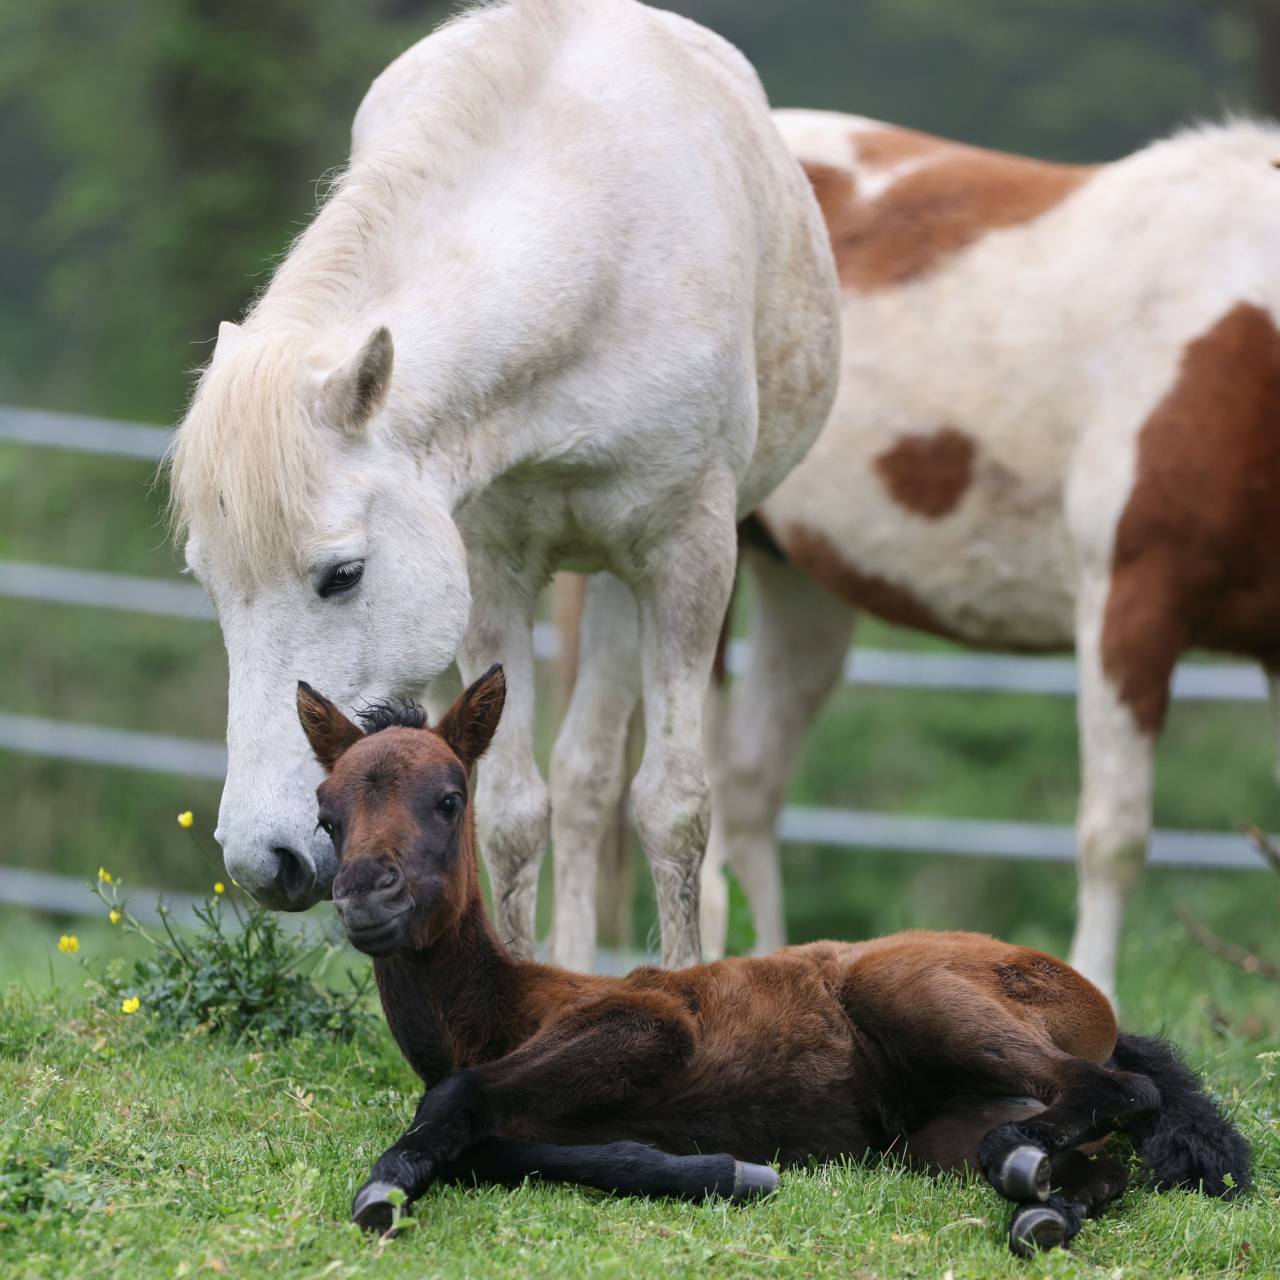 (A newborn foal with shiny hooves rests in front of its mother at the Jeju Horse Pasture on Hallasan, Jeju Island. Photo © Hyungwon Kang)